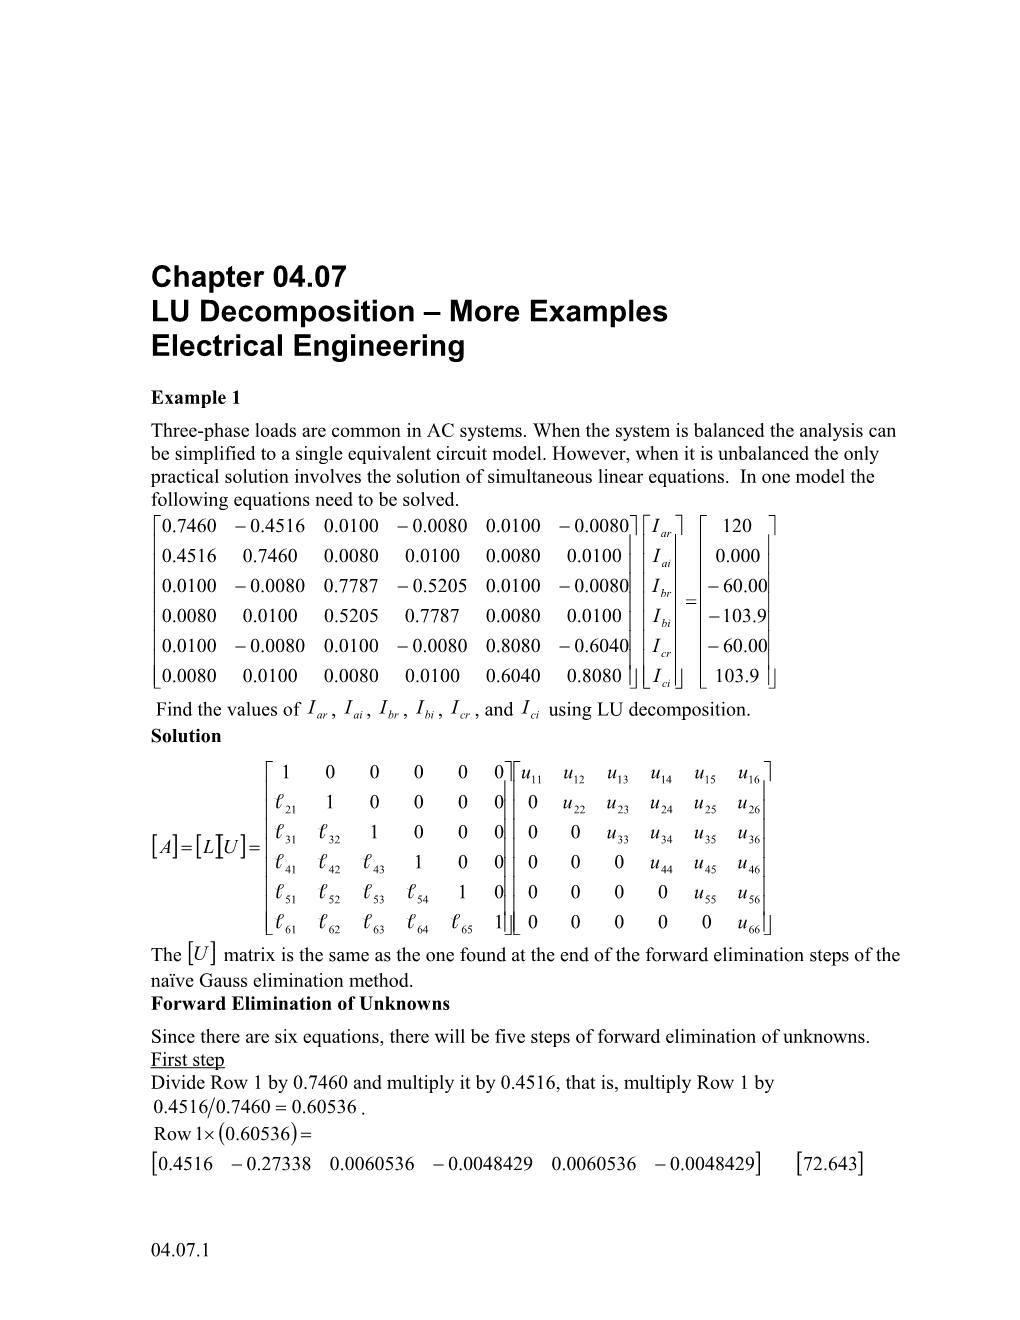 LU Decomposition-More Examples: Electrical Engineering